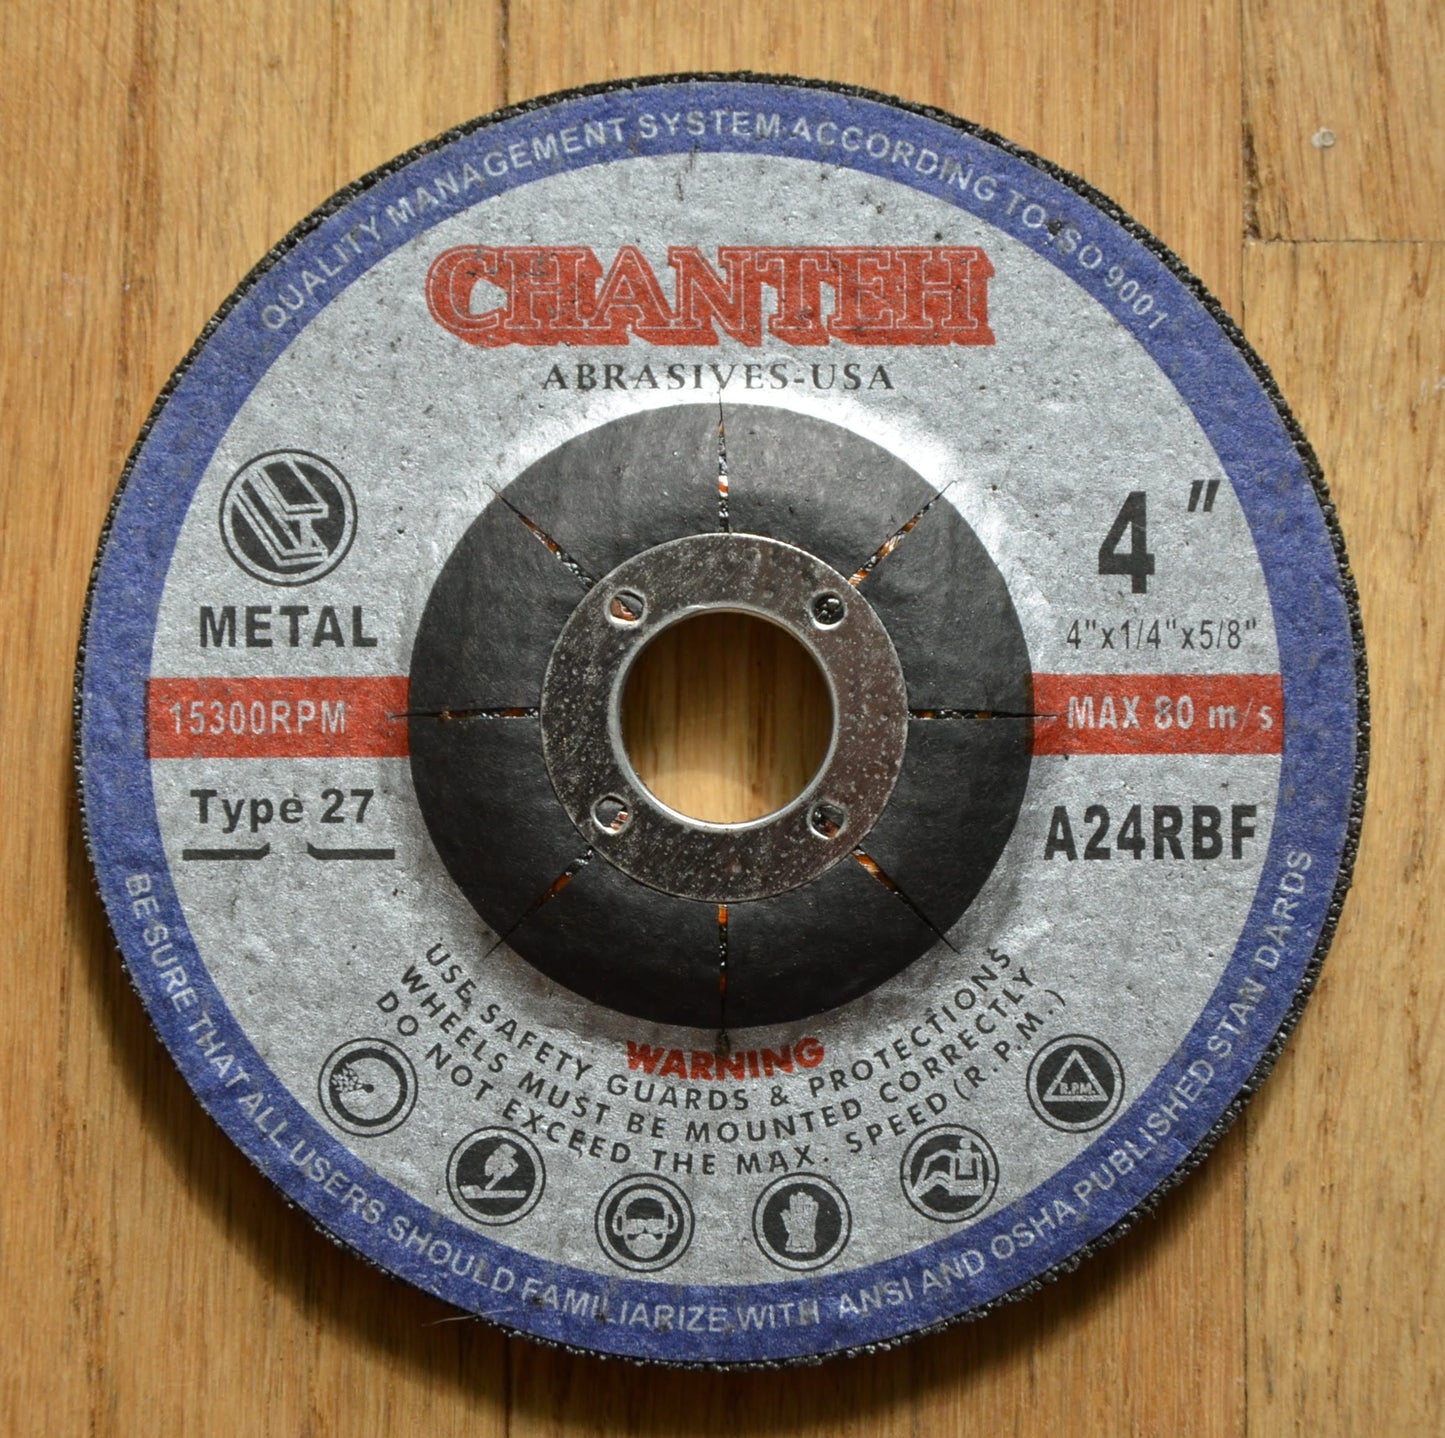 4" x 1/4" x 5/8" Metal GRINDING WHEELS for Angle Grinder tool - 25 Pack